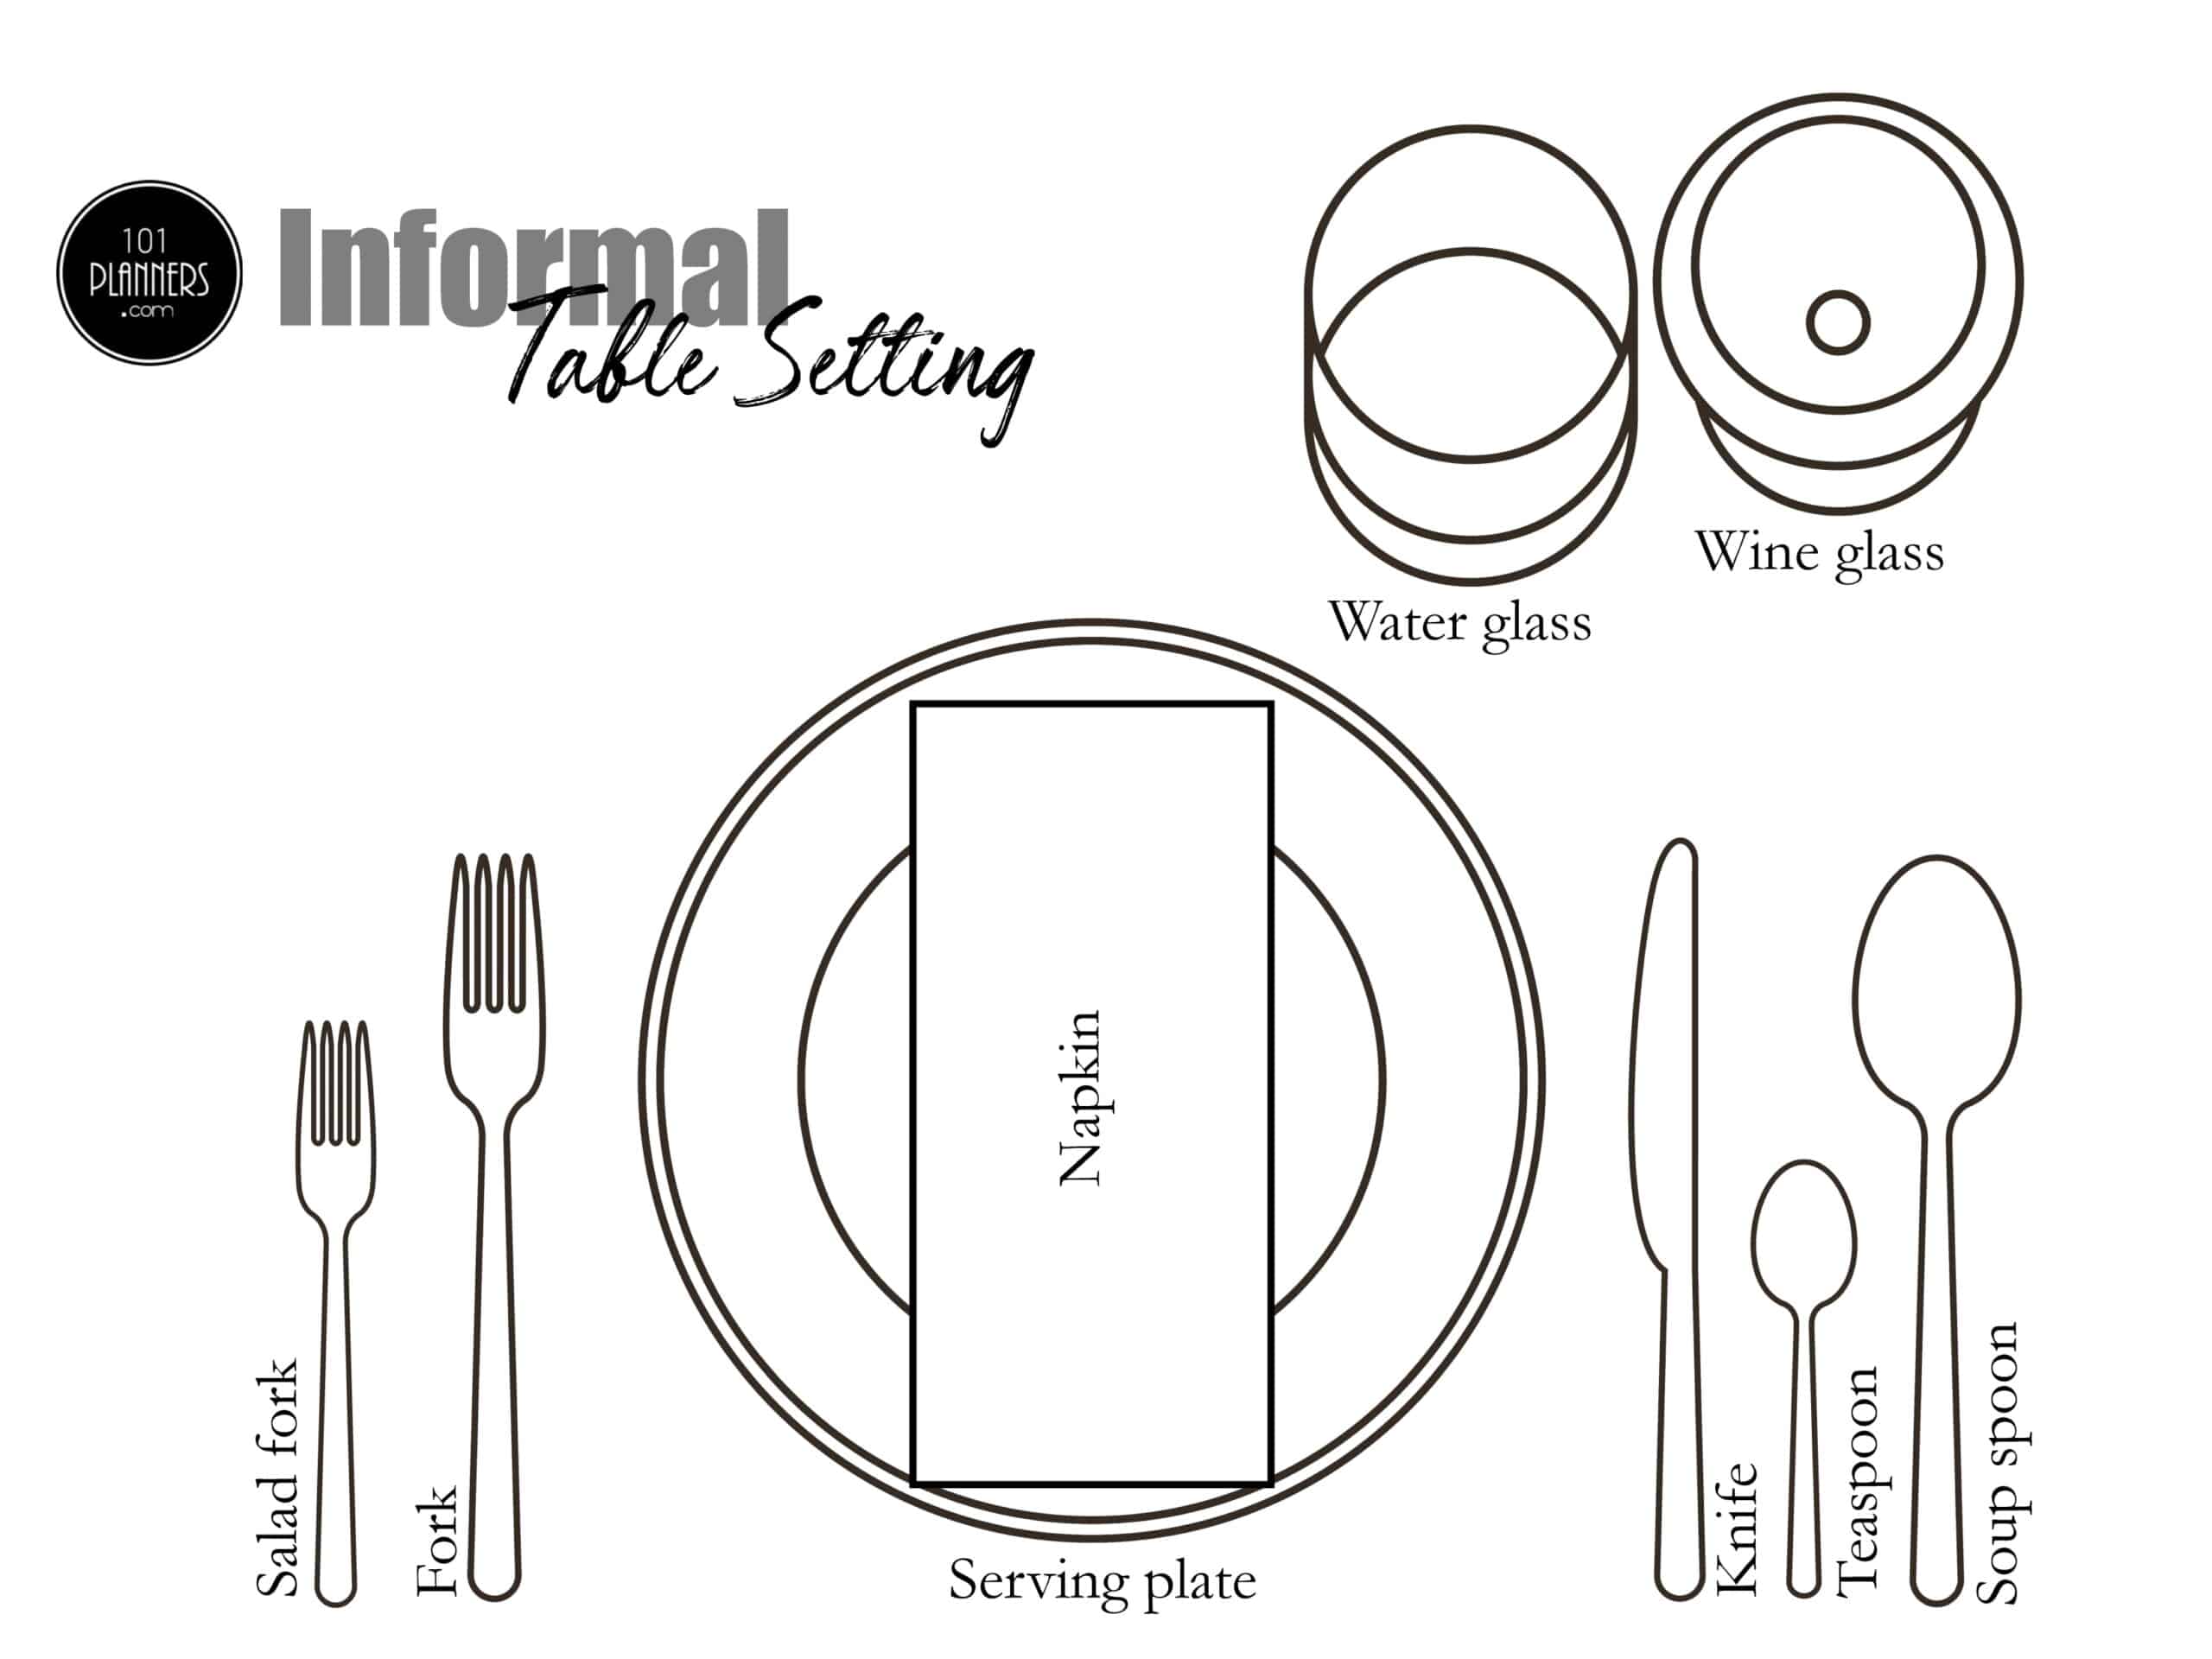 How to Set a Table | With 5 Place Setting Templates for Every Event